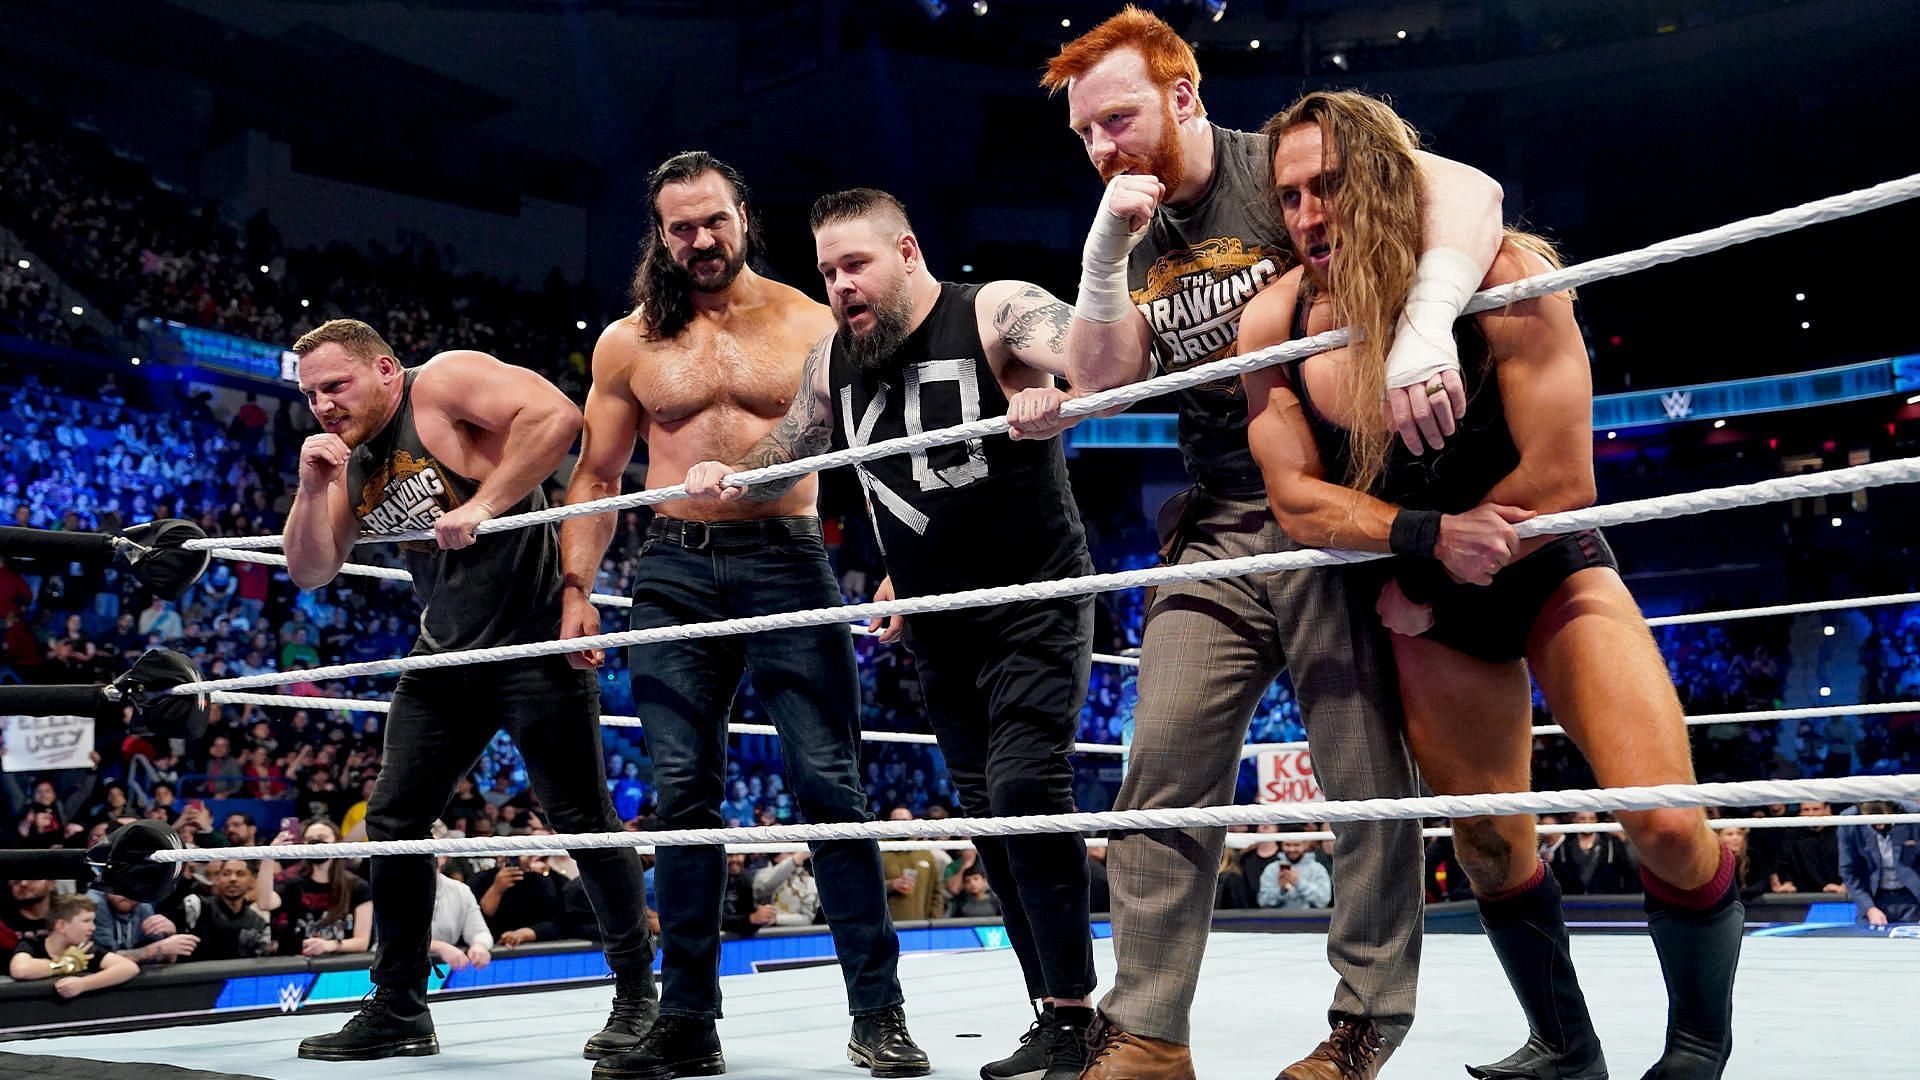 Brawling Brutes with Drew McIntyre and Kevin Owens stood tall at the end of SmackDown